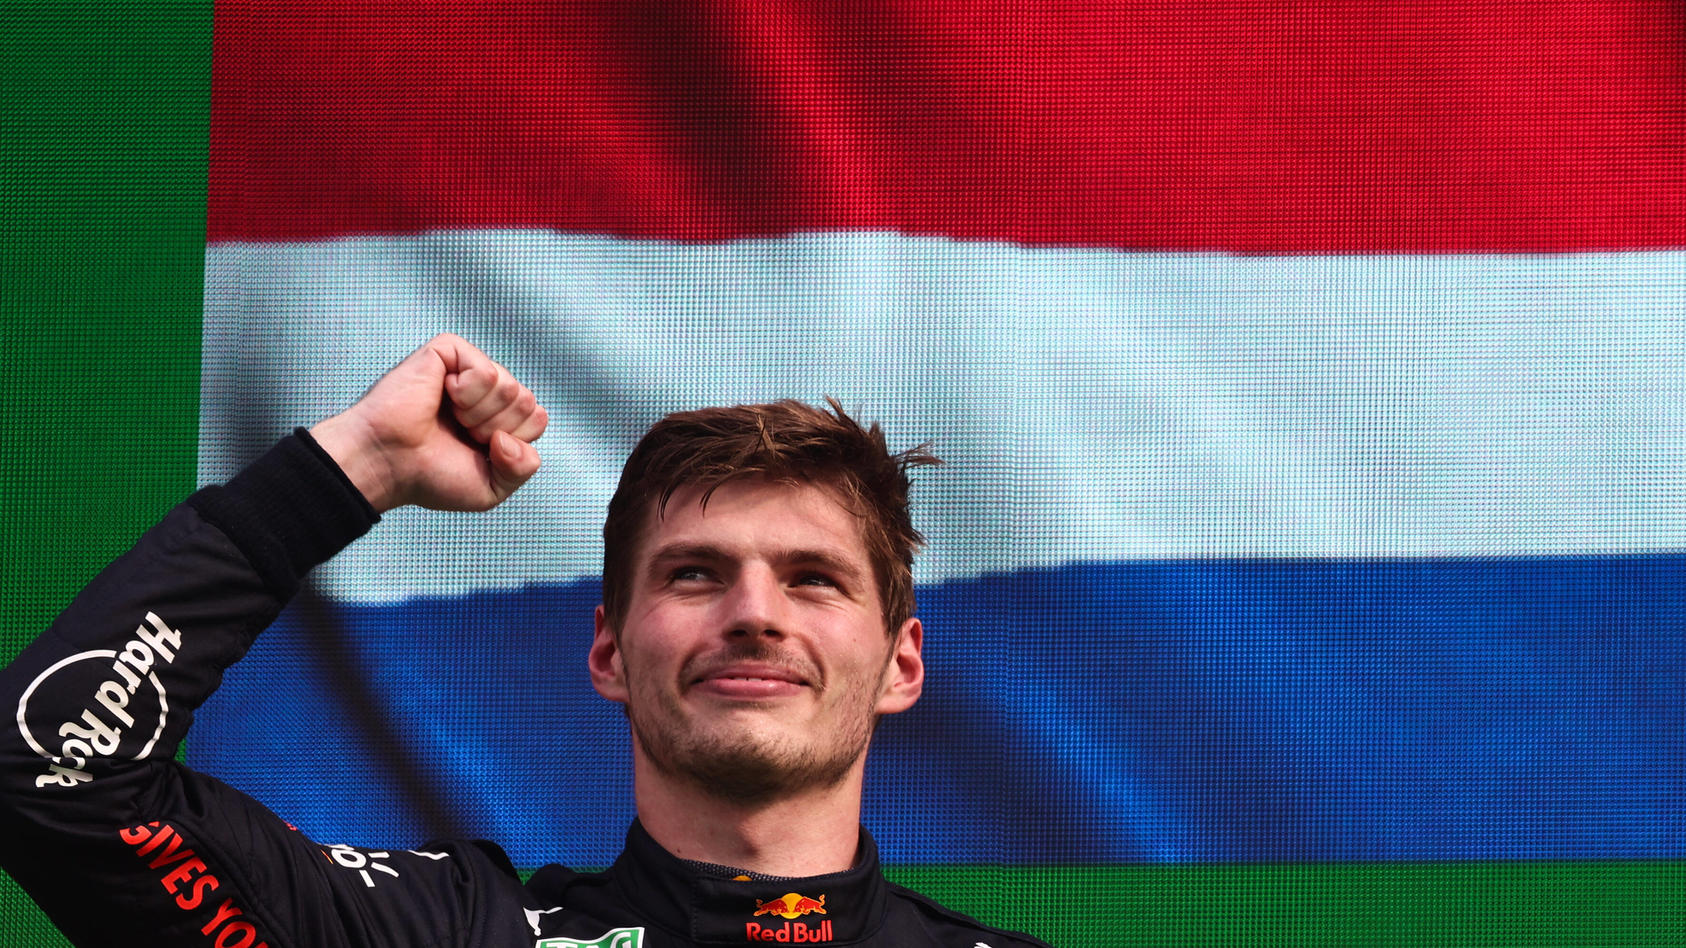  F1 Grand Prix Of The Netherlands Max Verstappen of Red Bull Racing on the podium of the Formula 1 Grand Prix of The Netherlands at Zandvoort circuit in Zandvoort, Netherlands on September 4, 2022. Zandvoort Netherlands PUBLICATIONxNOTxINxFRA Copyrig